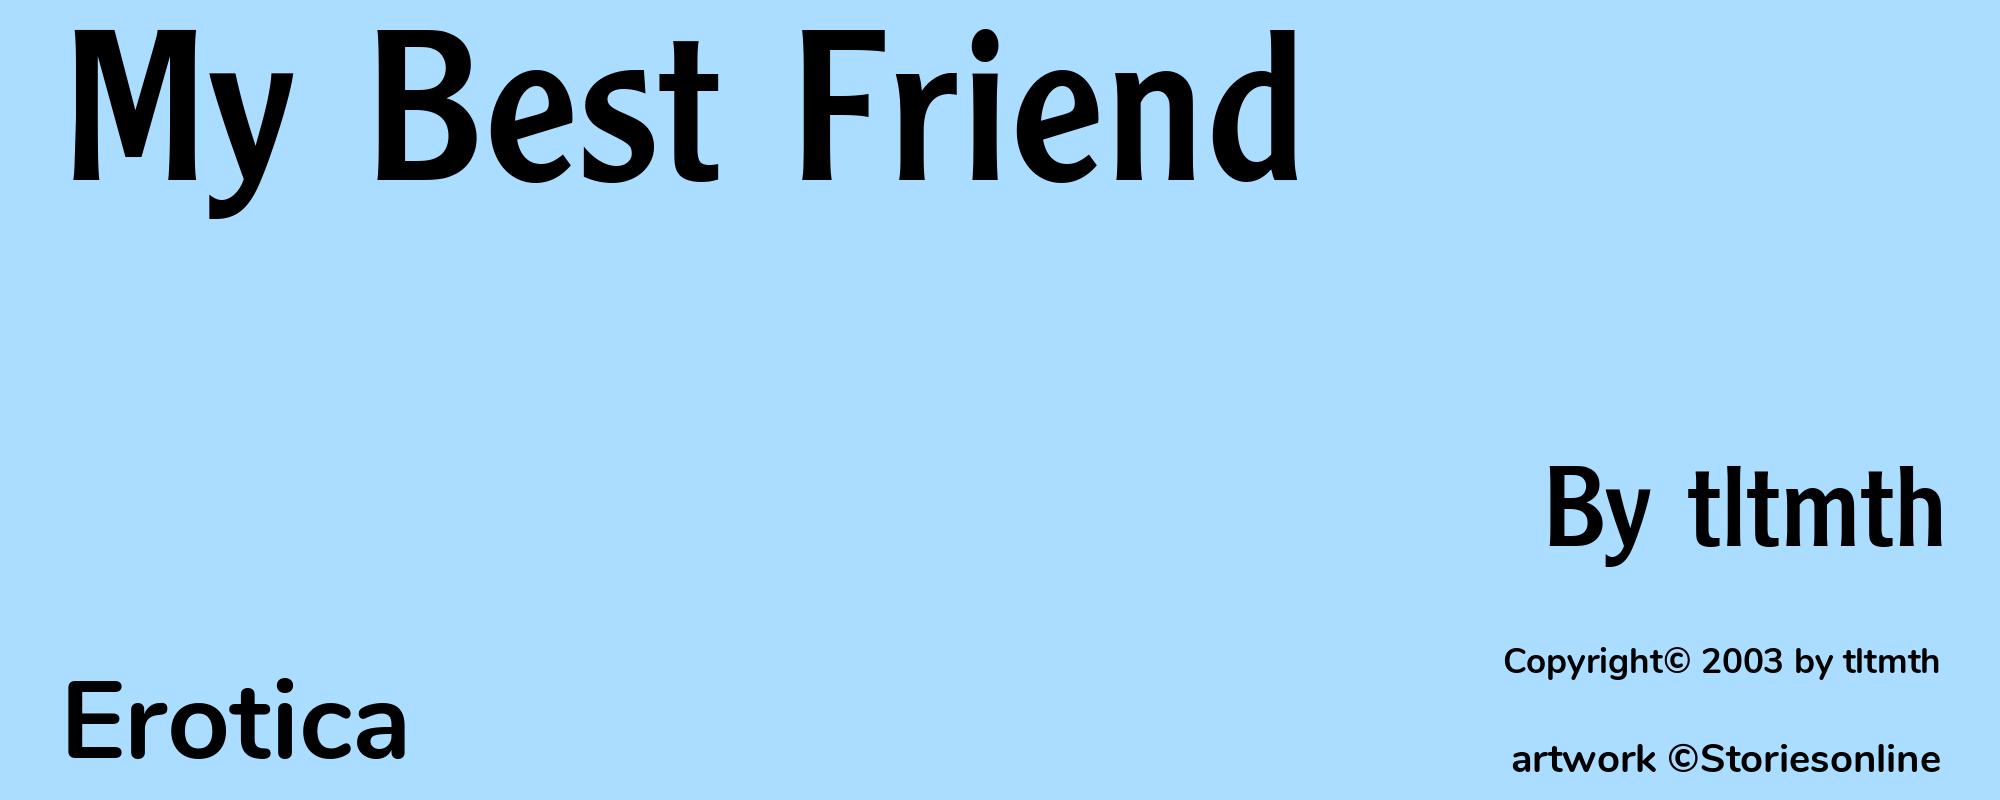 My Best Friend - Cover